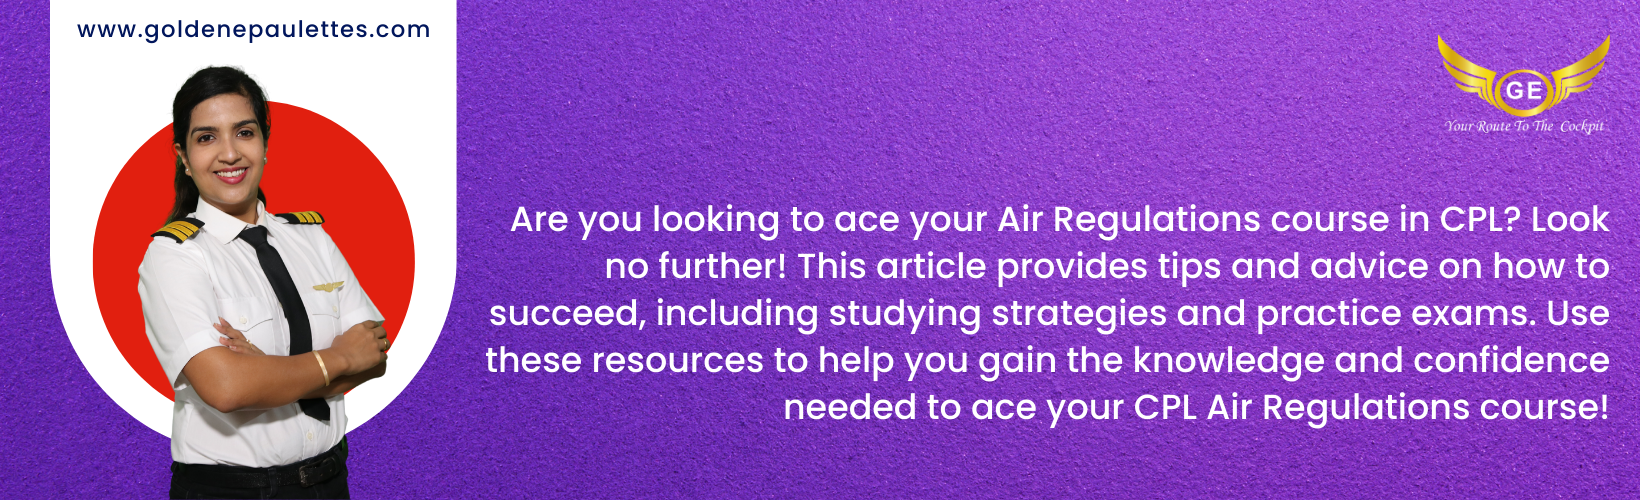 How to Find a Qualified Air Regulations Course Instructor